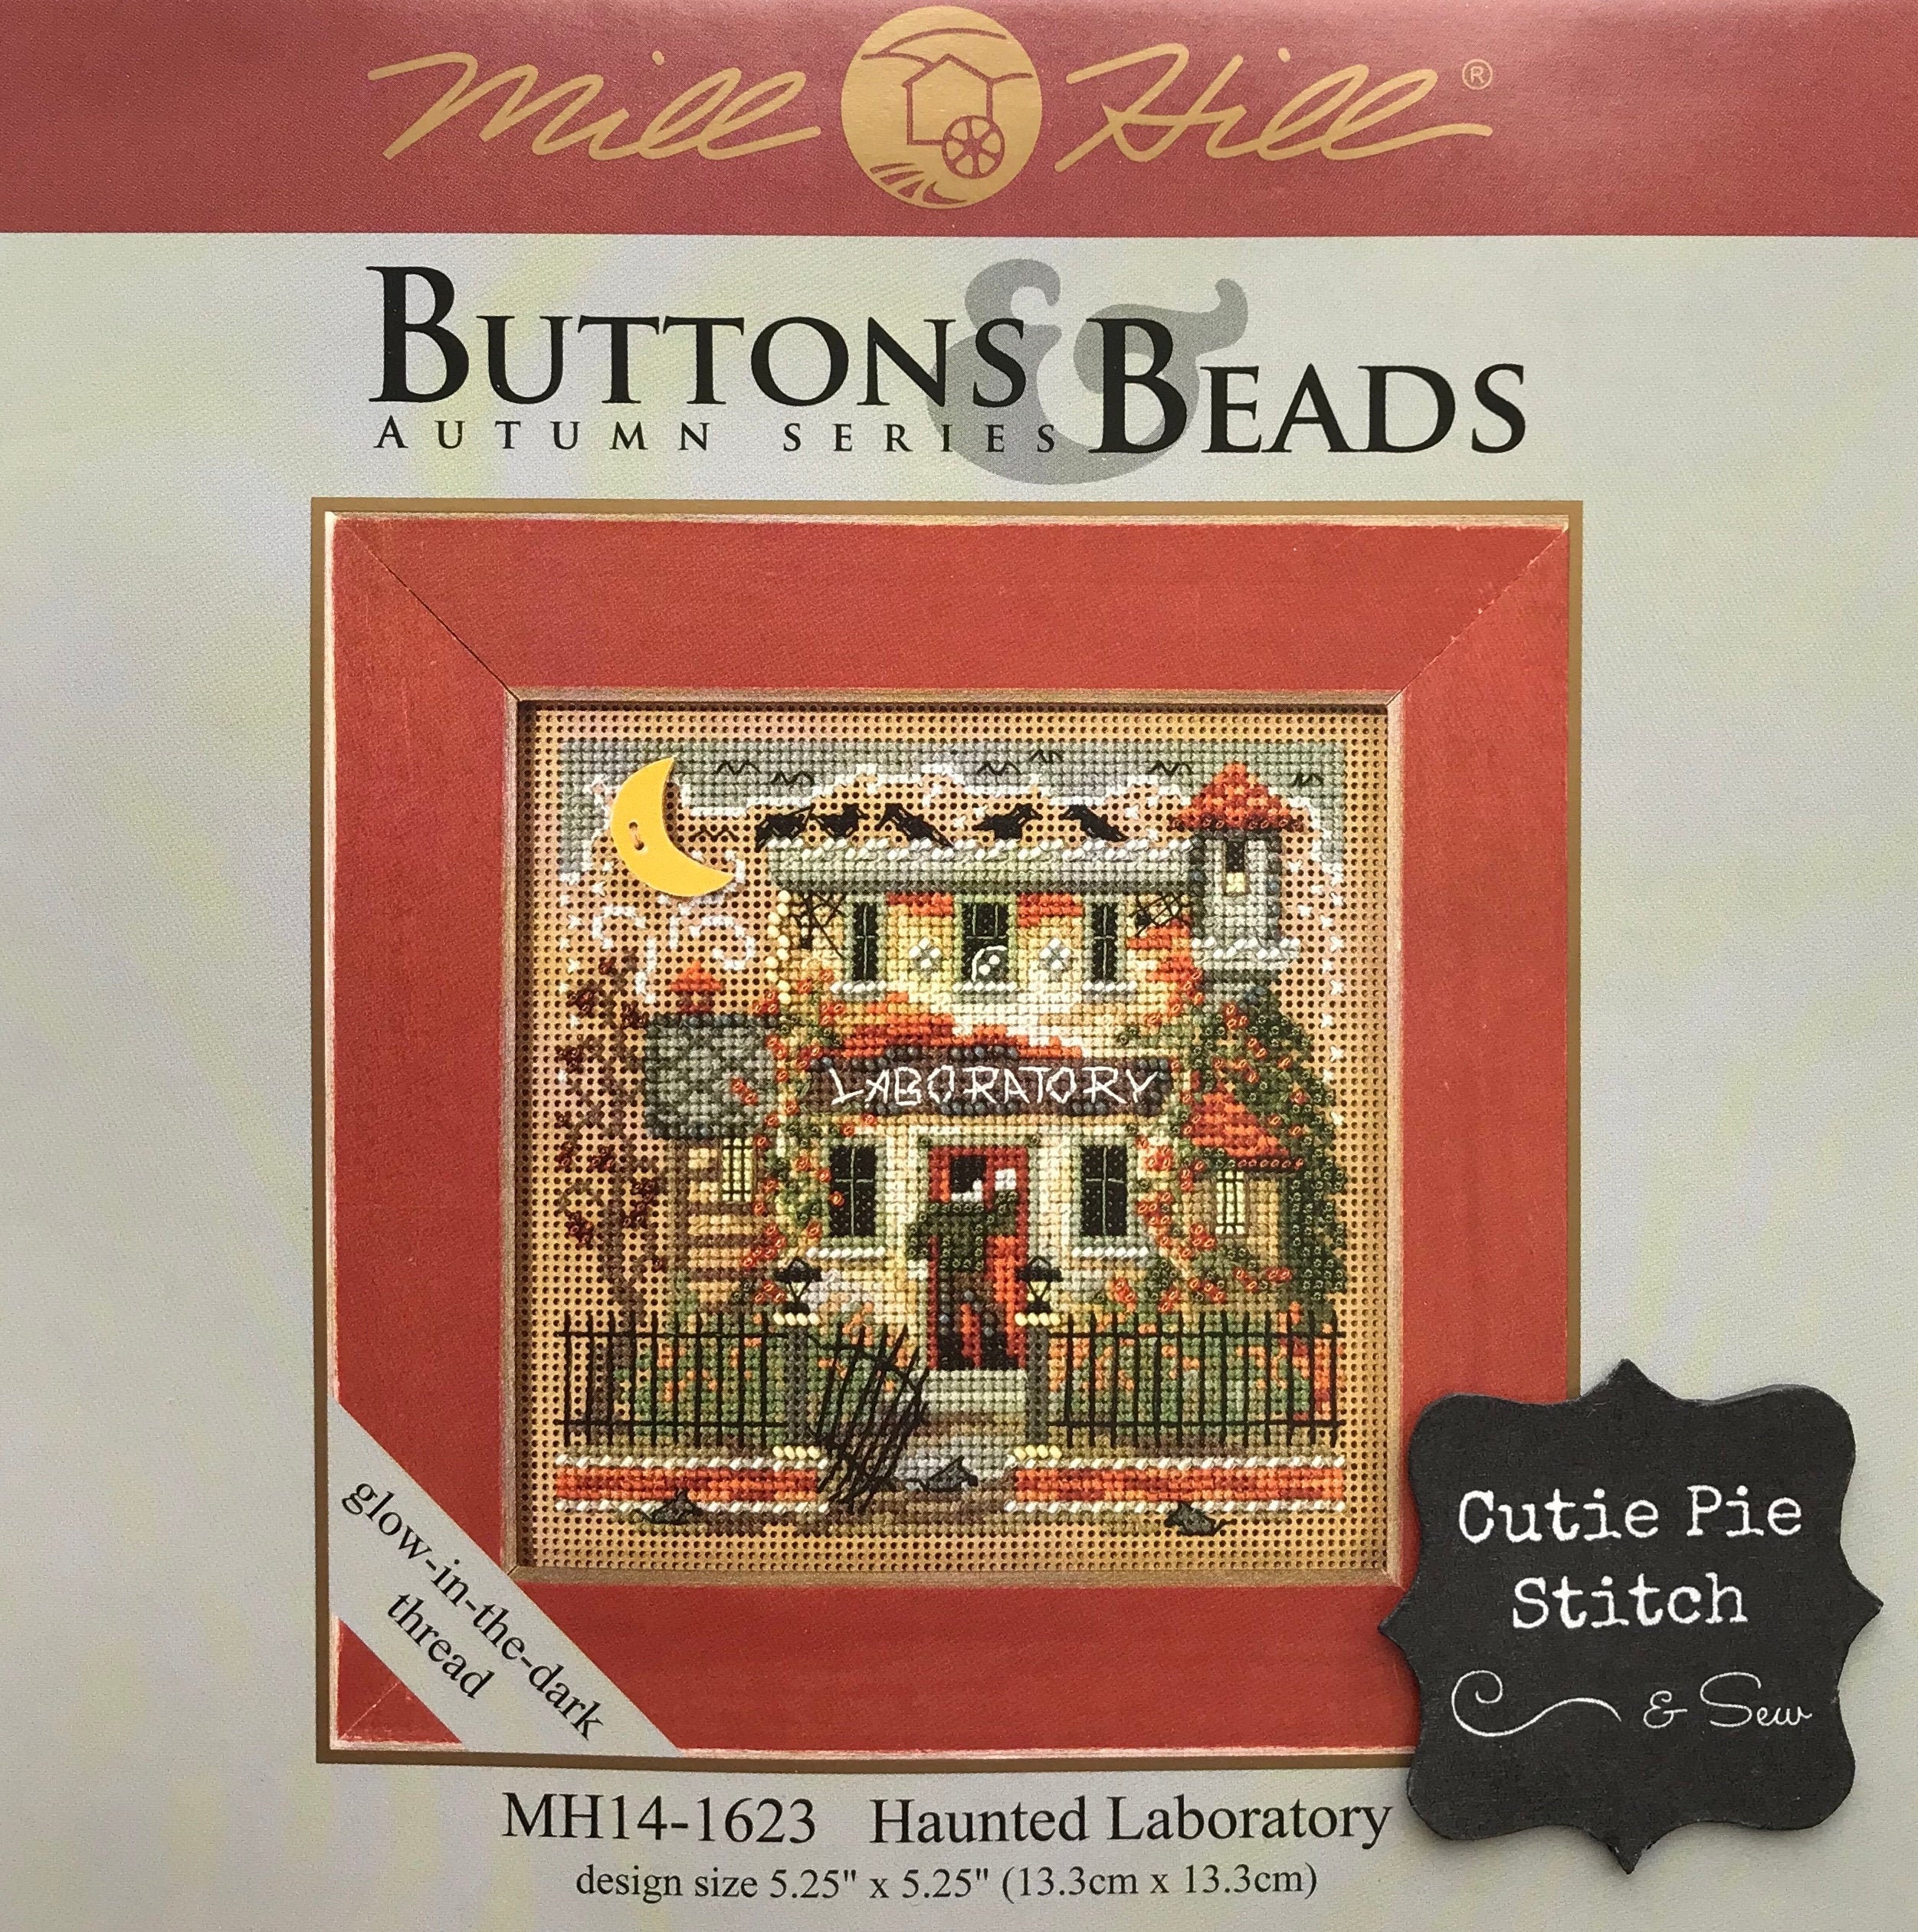 Mill Hill Haunted Laboratory Cross Stitch Kit Buttons & Beads MH141623